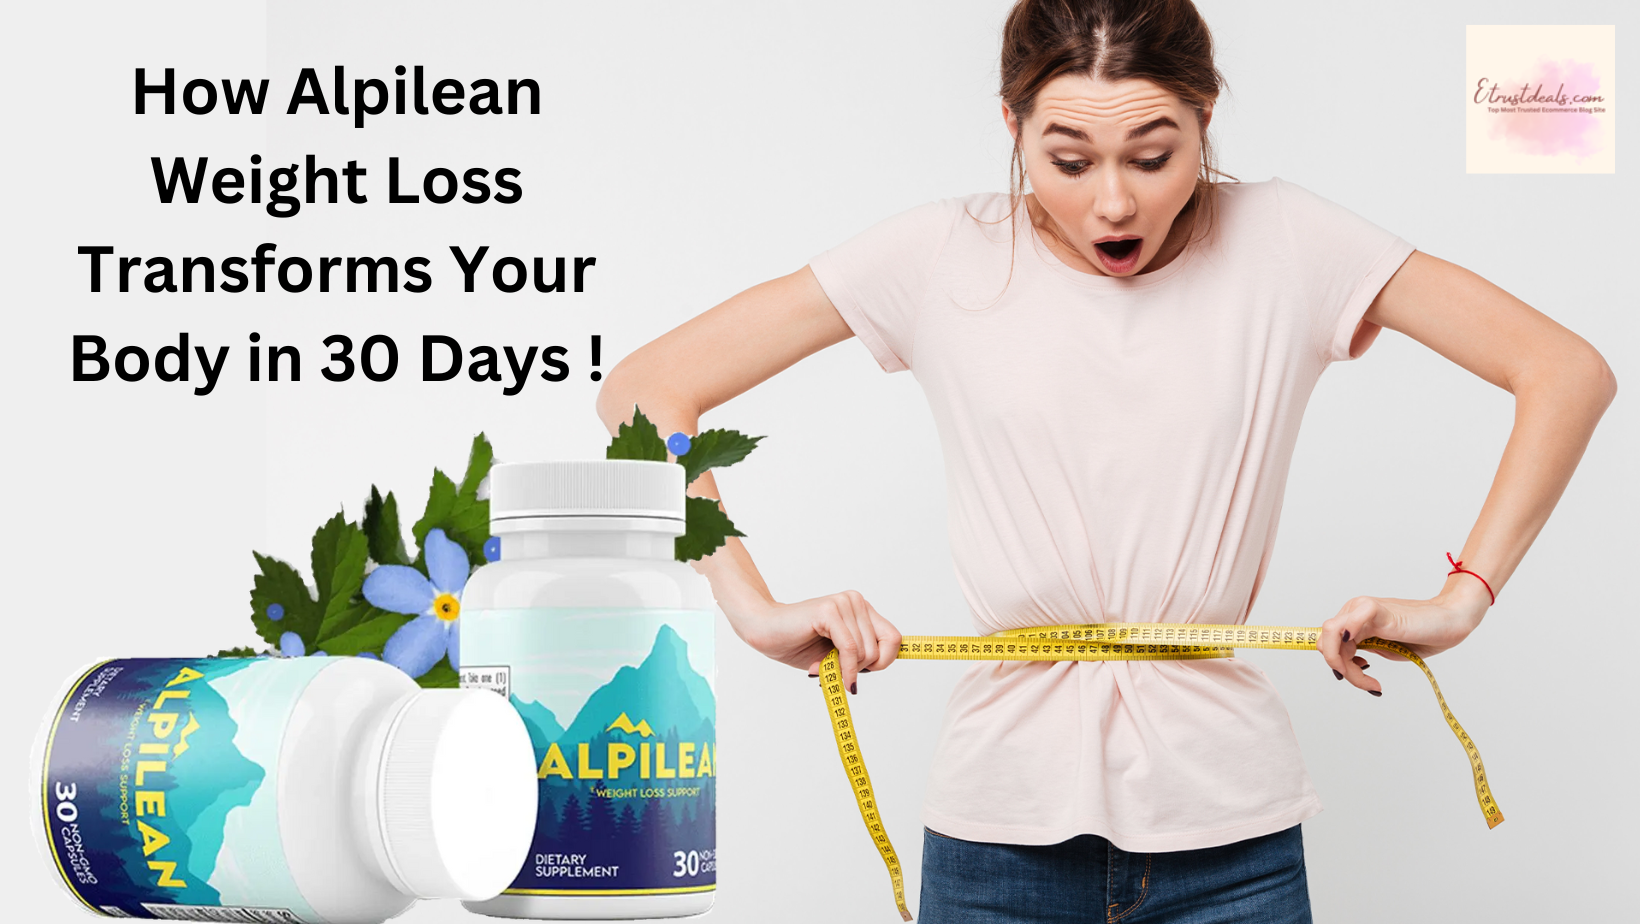 How Alpilean Weight Loss Transforms Your Body in 30 Days !